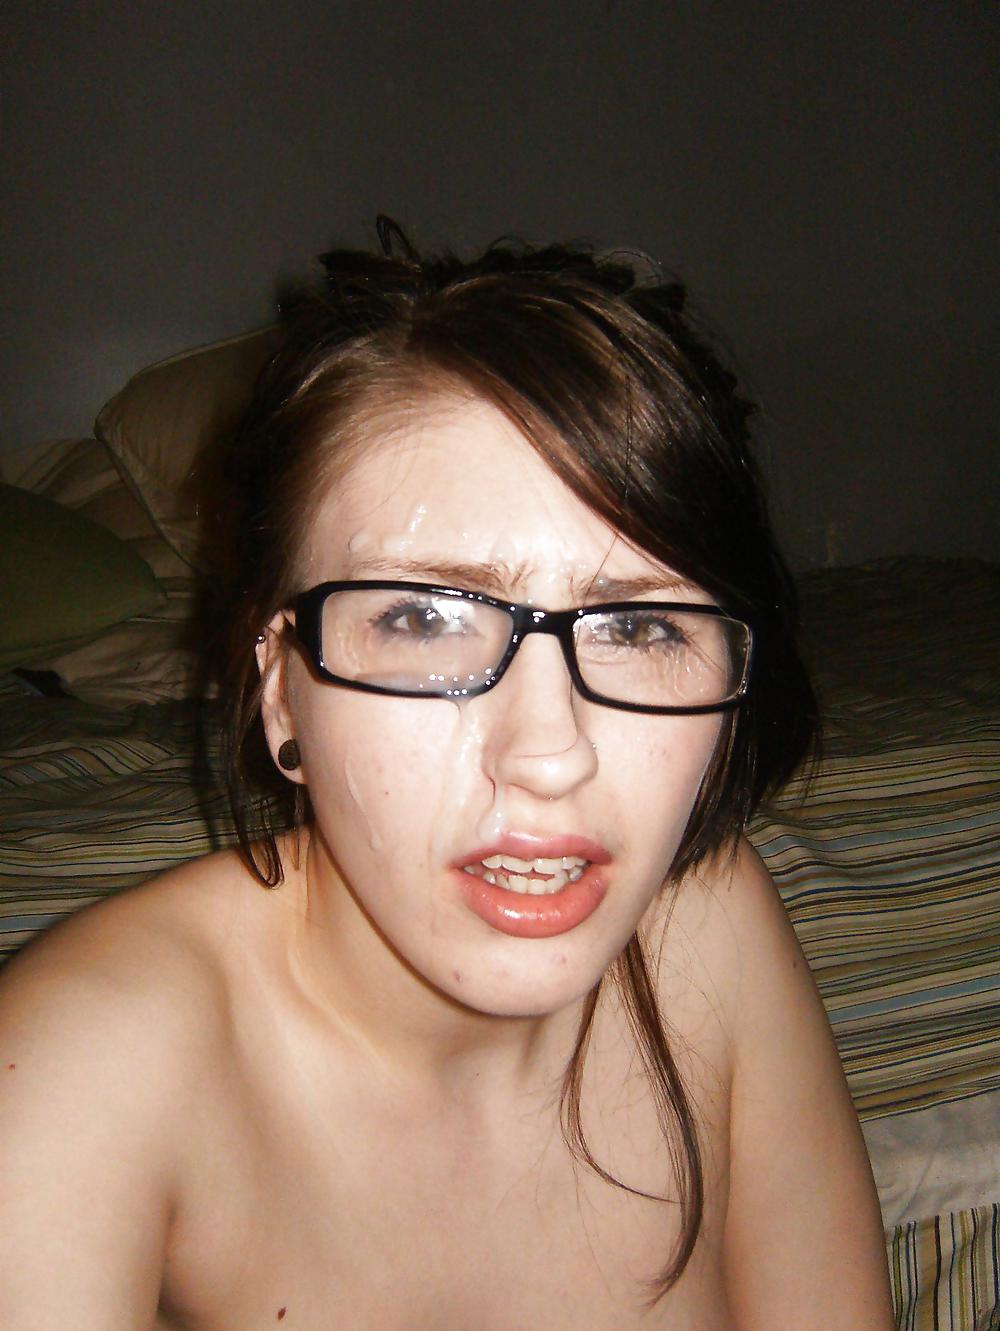 Nerdy Girls 2 porn pictures